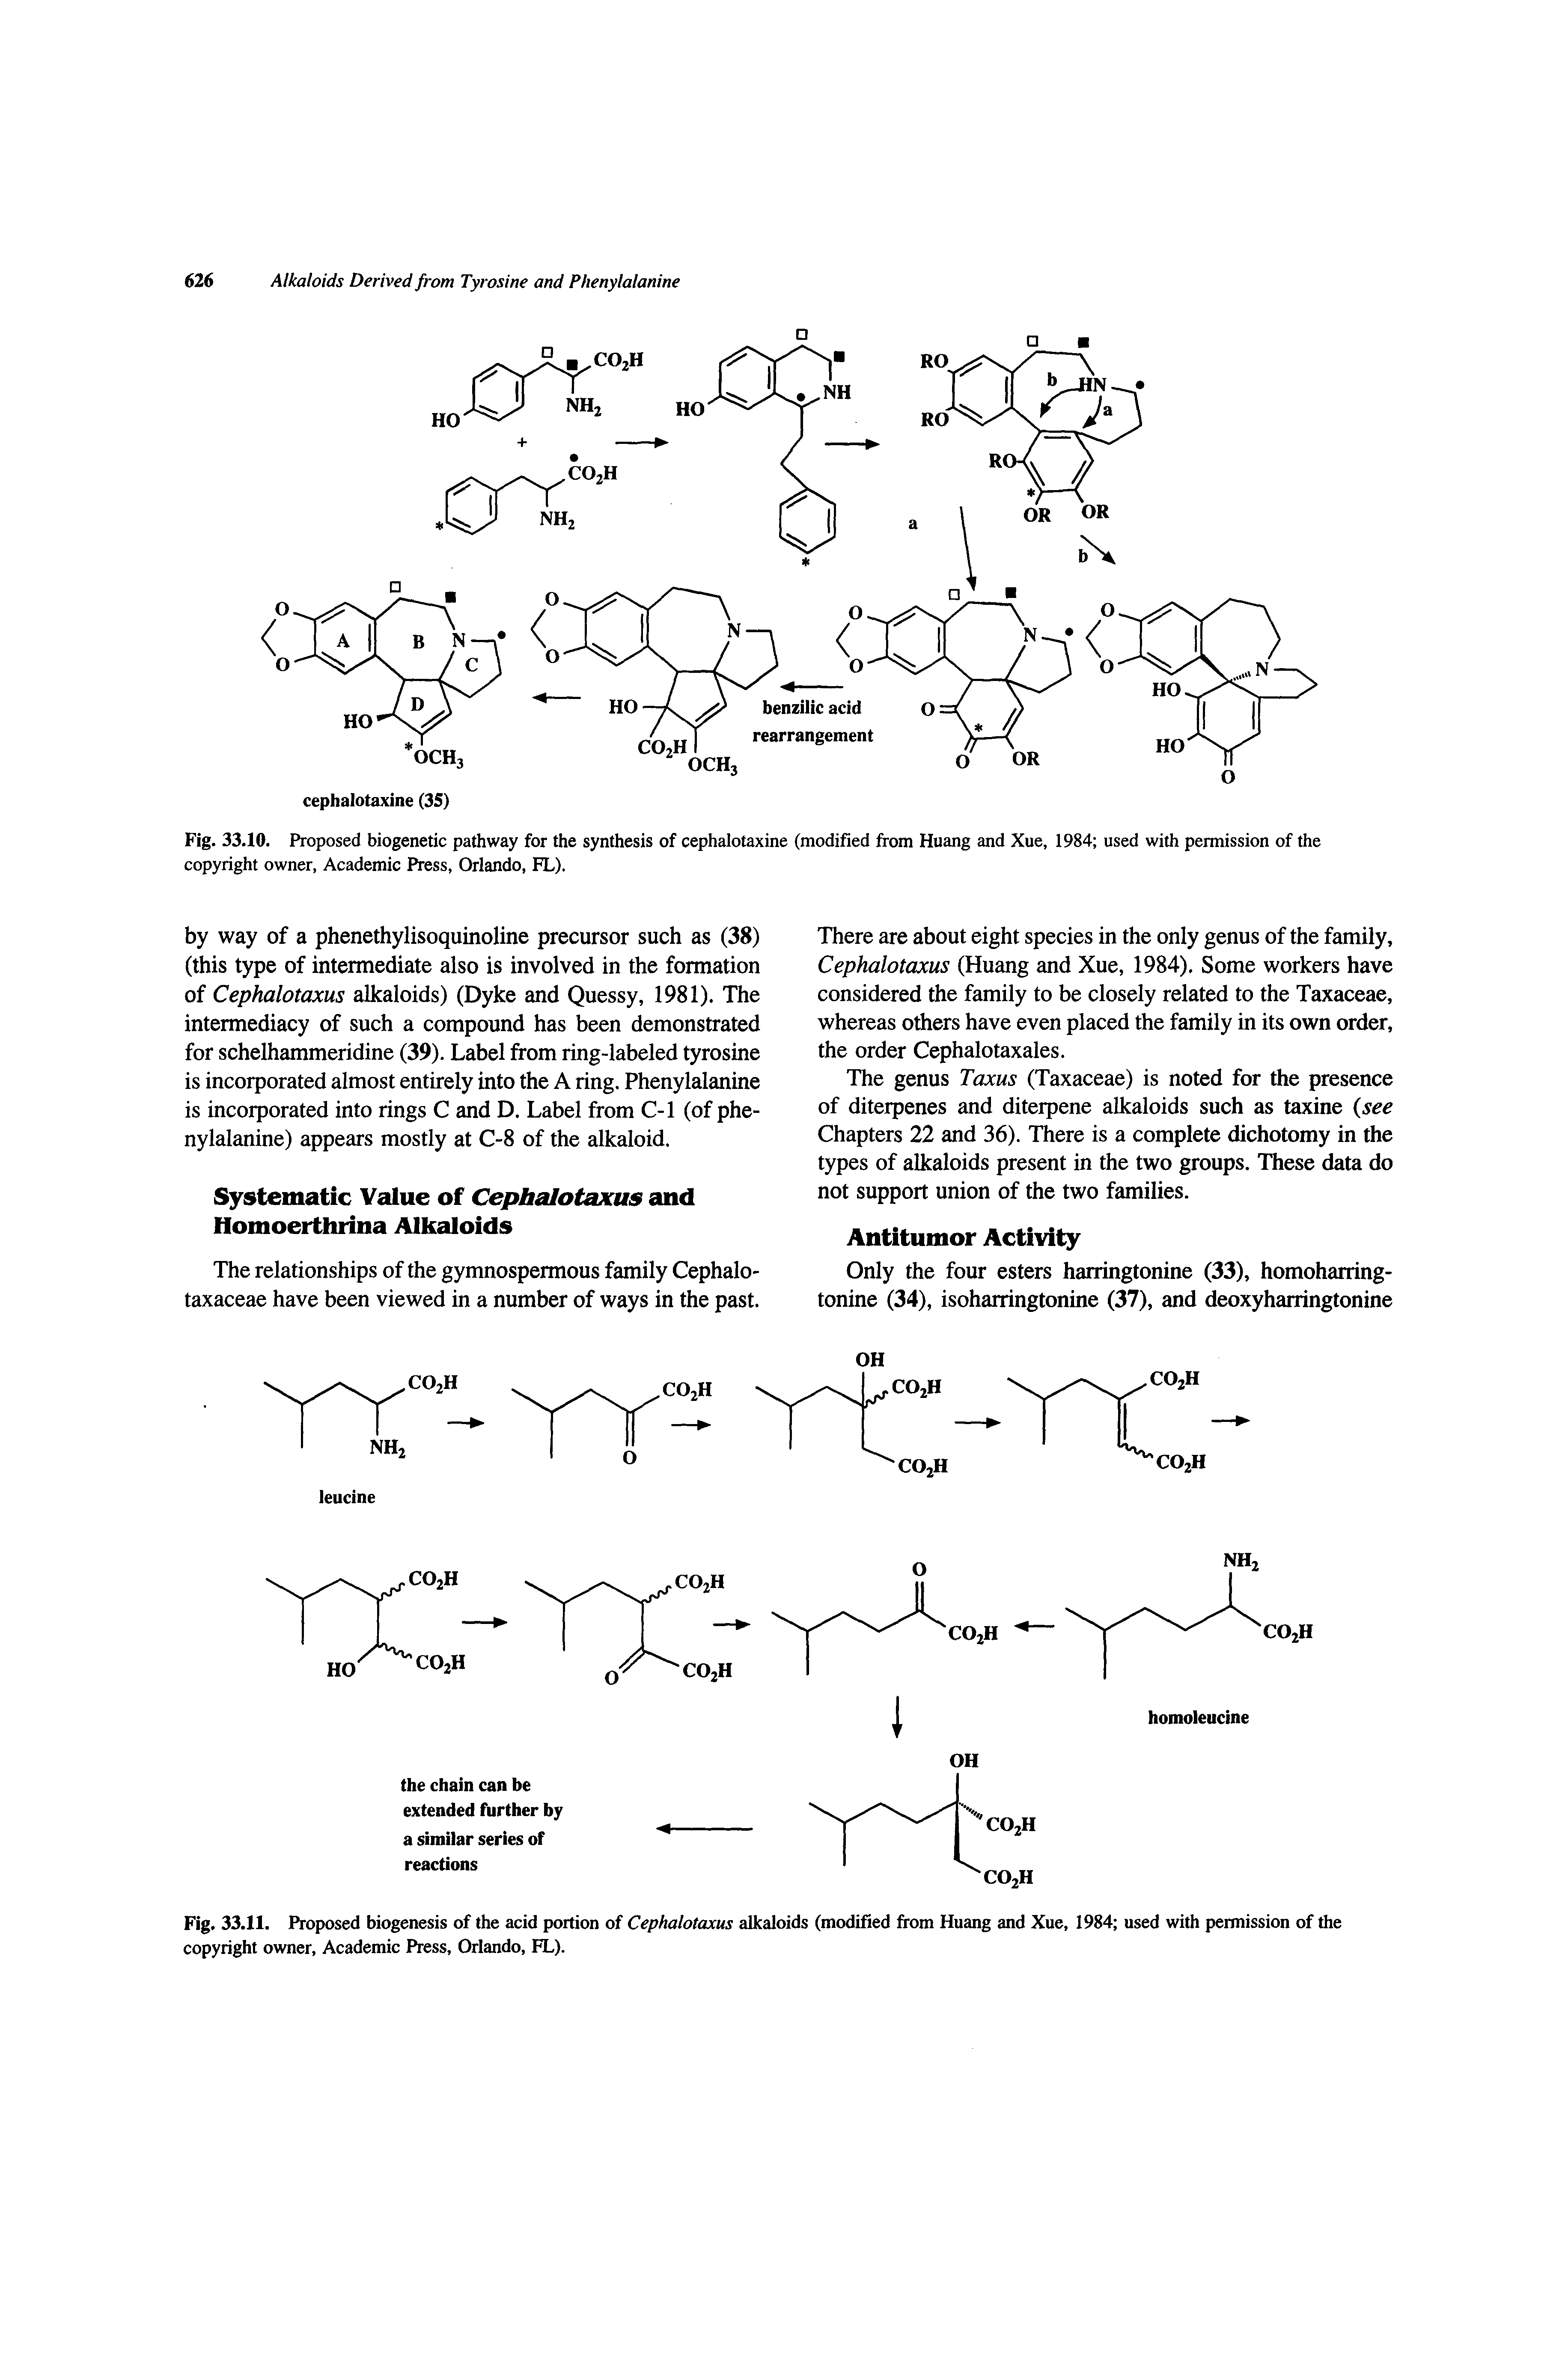 Fig. 33.11. Proposed biogenesis of the acid portion of Cephalotaxus alkaloids (modified from Huang and Xue, 1984 used with permission of the copyright owner. Academic Press, Orlando, FL).